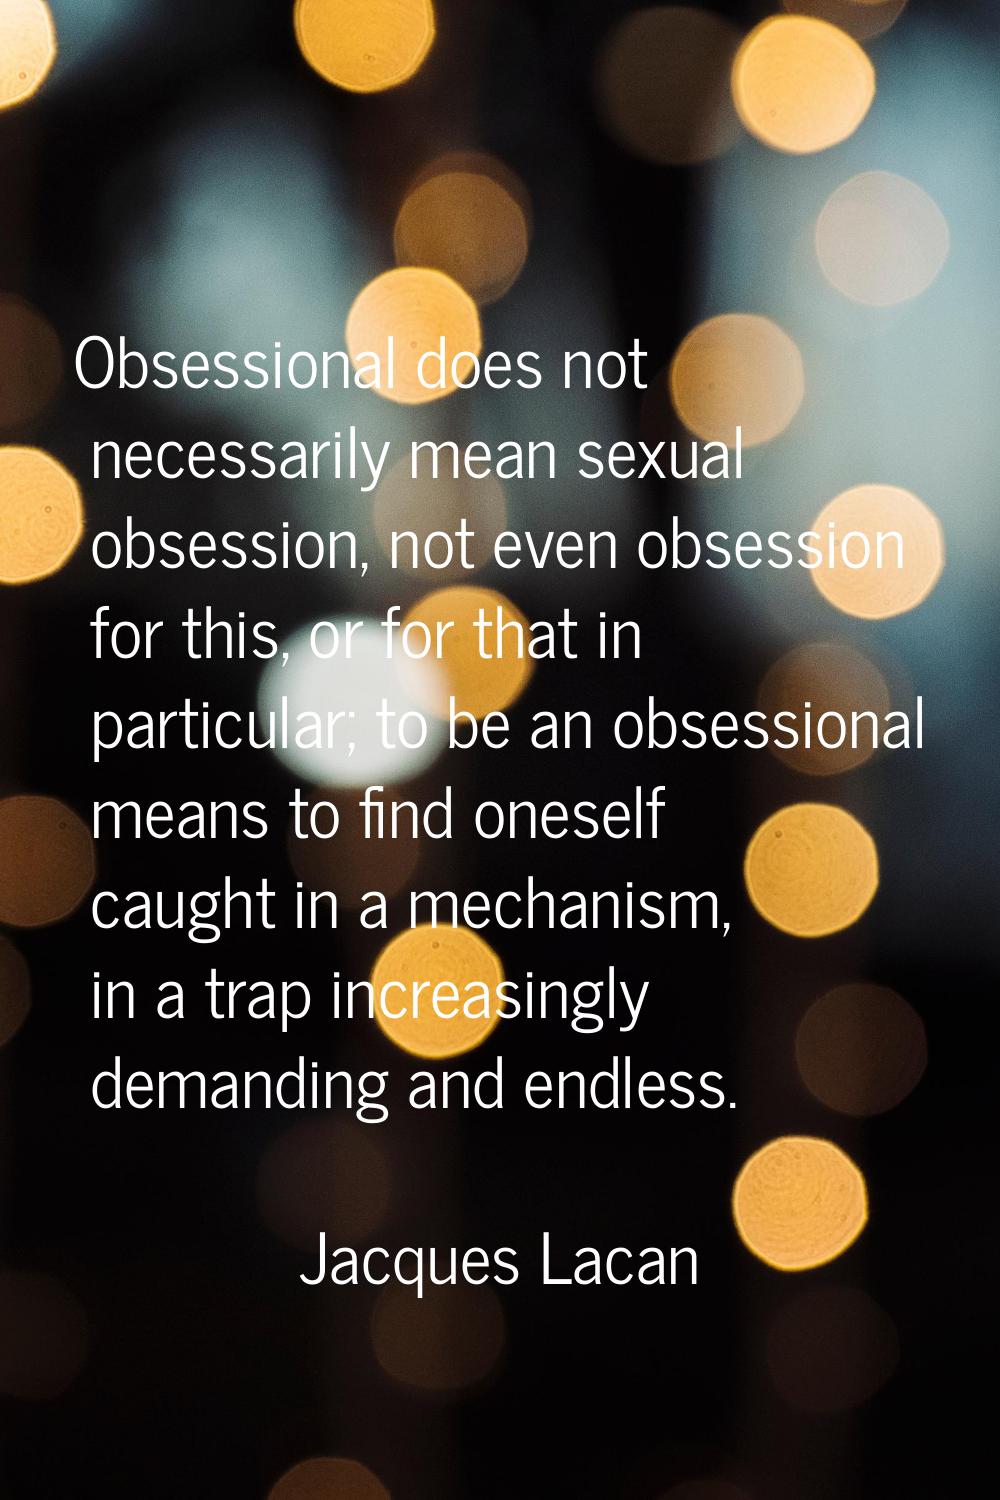 Obsessional does not necessarily mean sexual obsession, not even obsession for this, or for that in